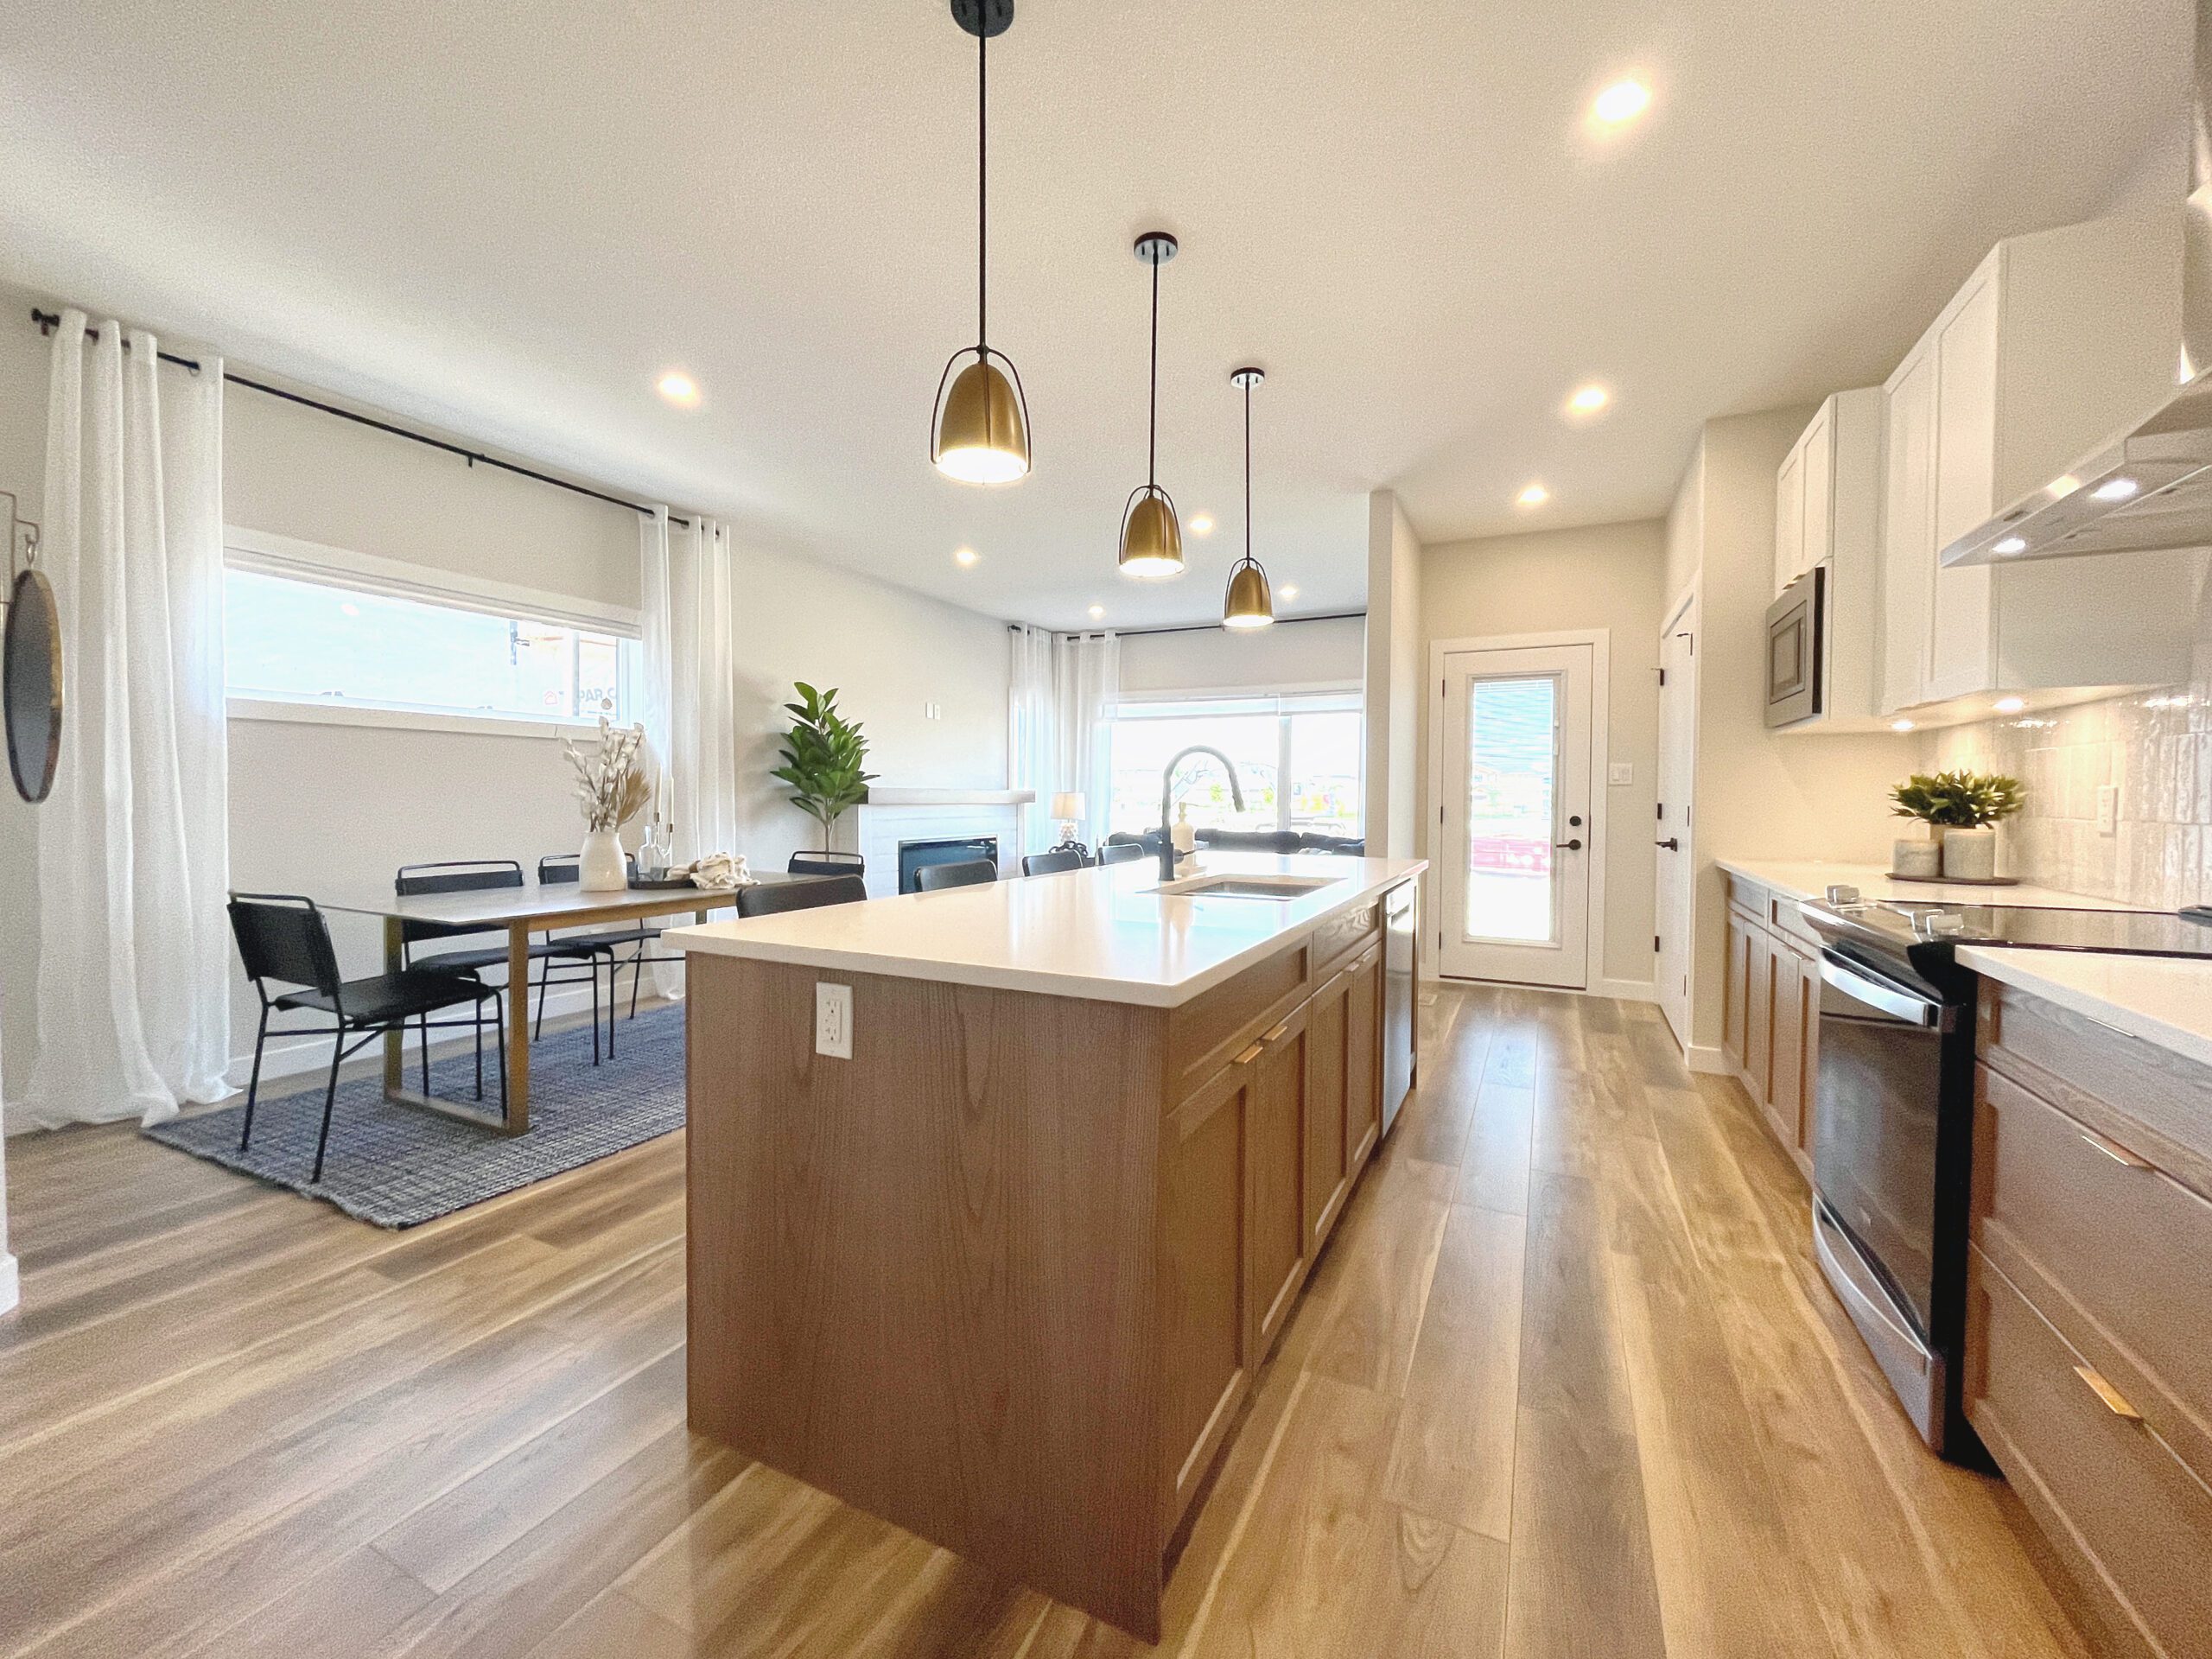 A kitchen with hardwood floors and a large island.